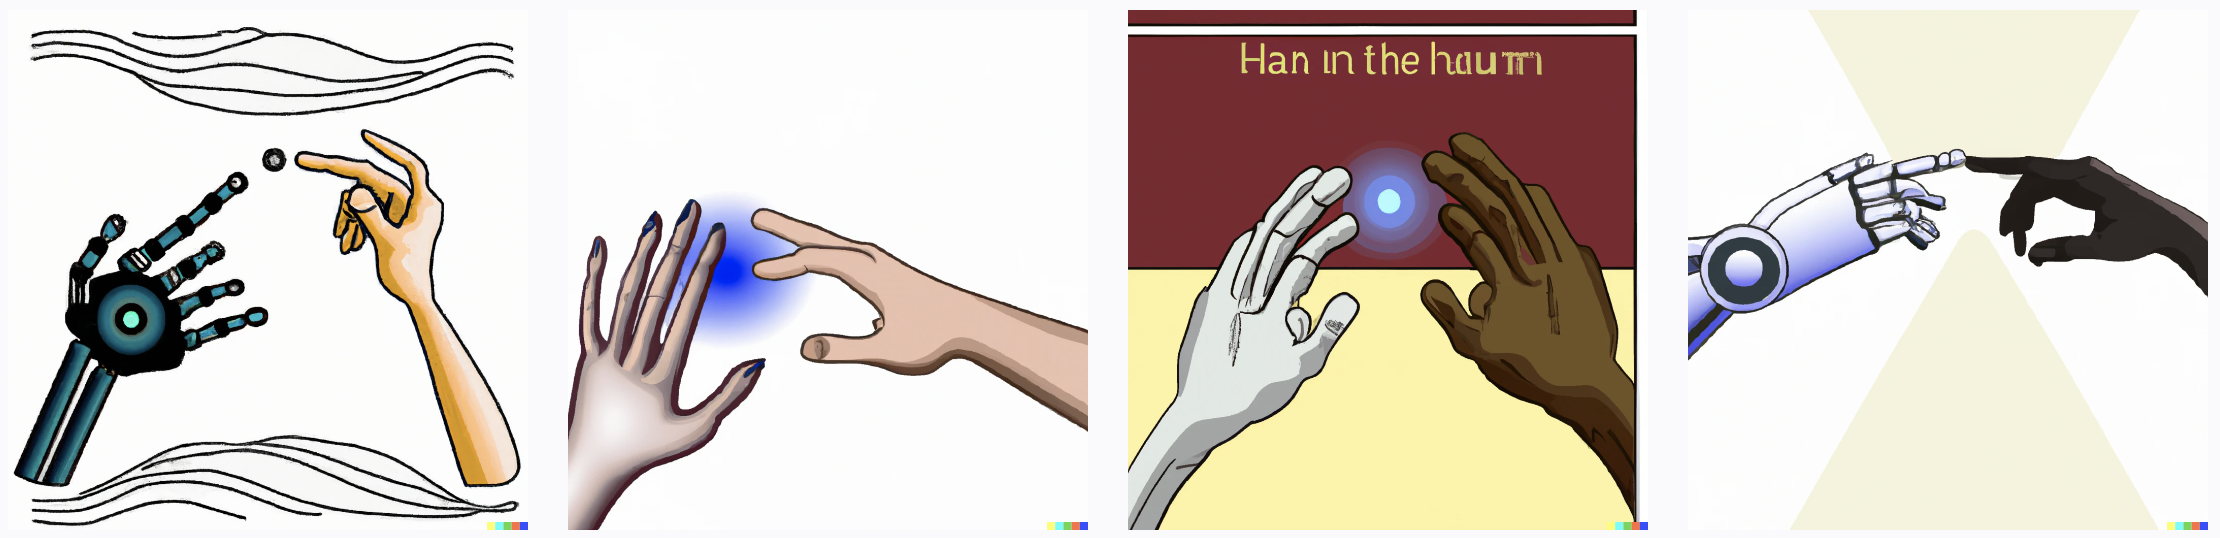 illustration of creation of adam fingers touching but with one hand being human, one hand being machine dalle2